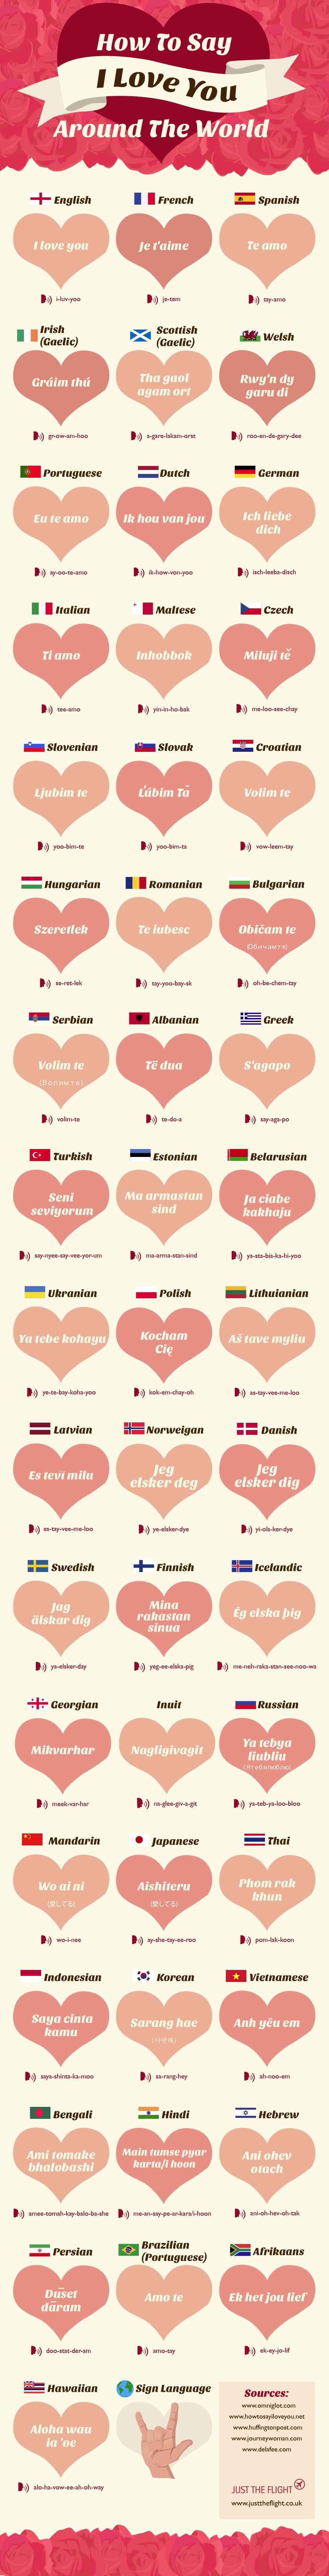 i love you - infographic